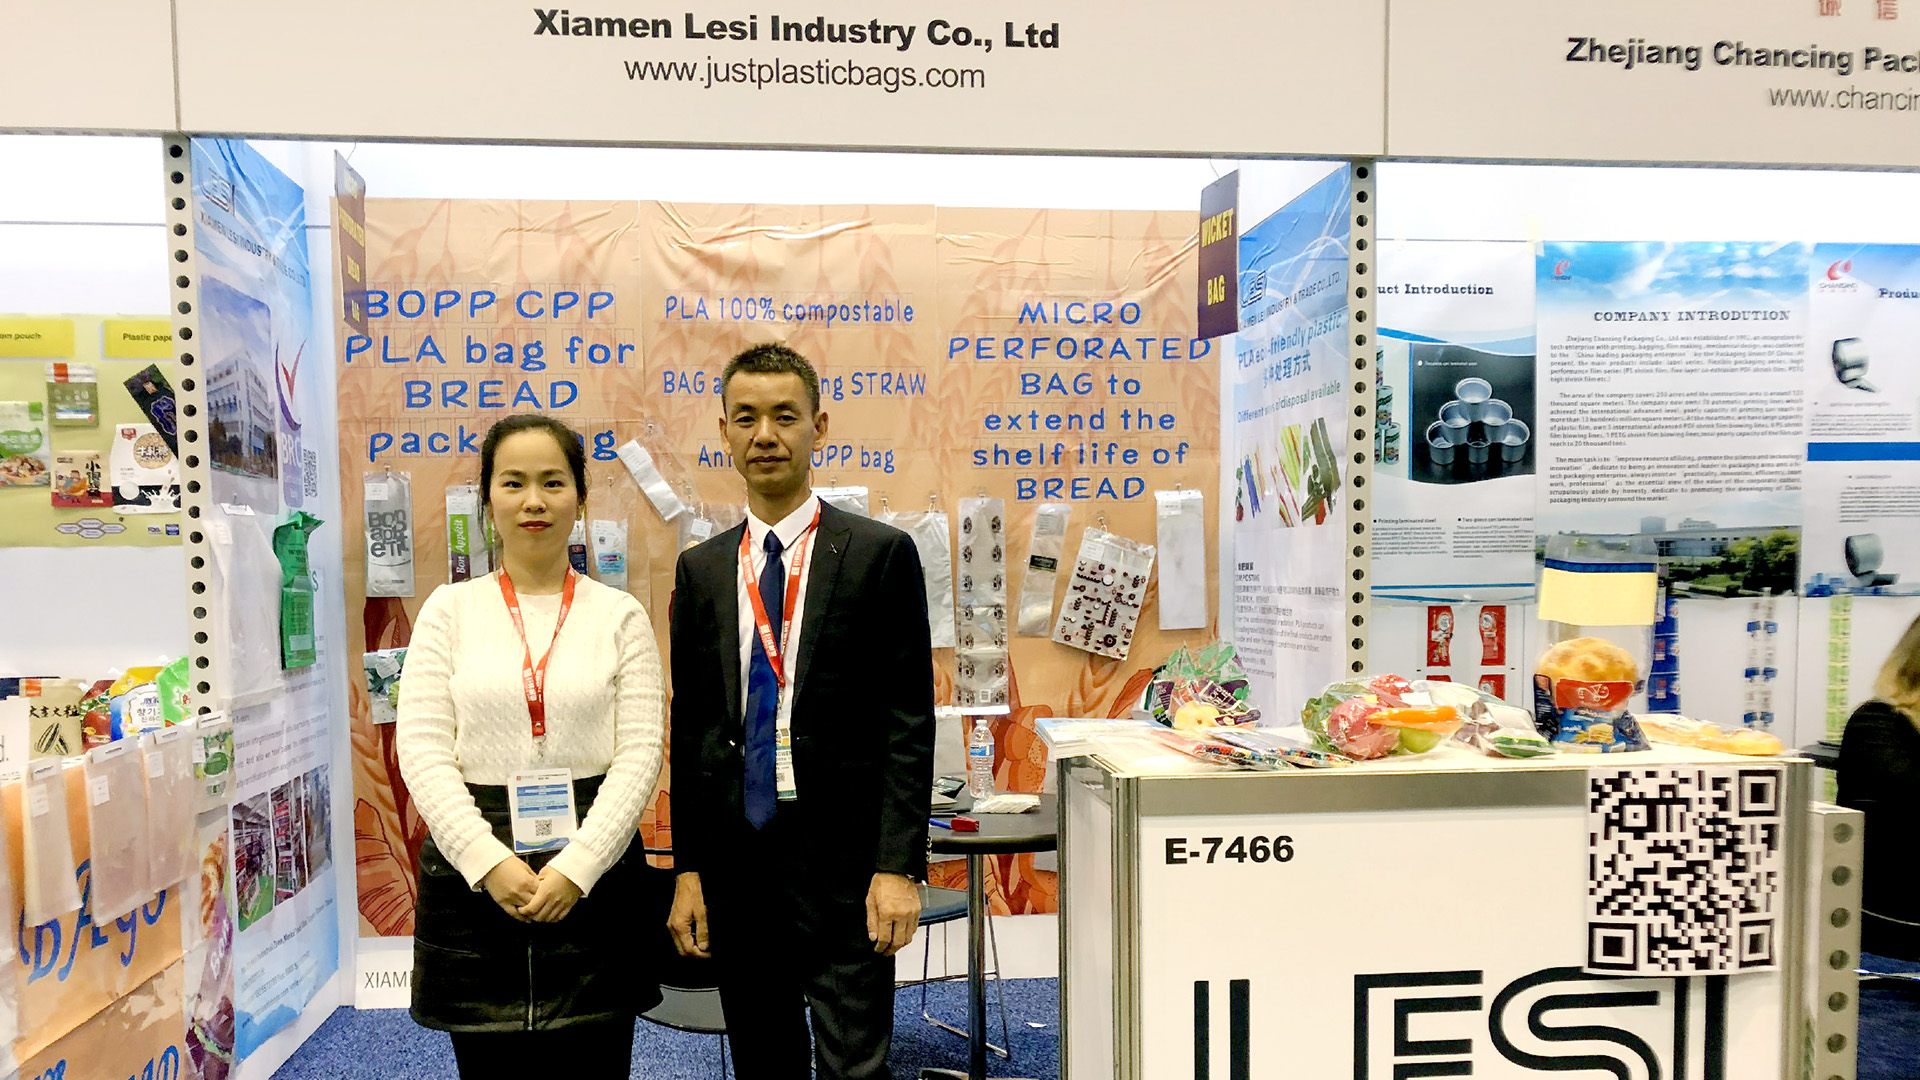 Group photo of exhibition customers